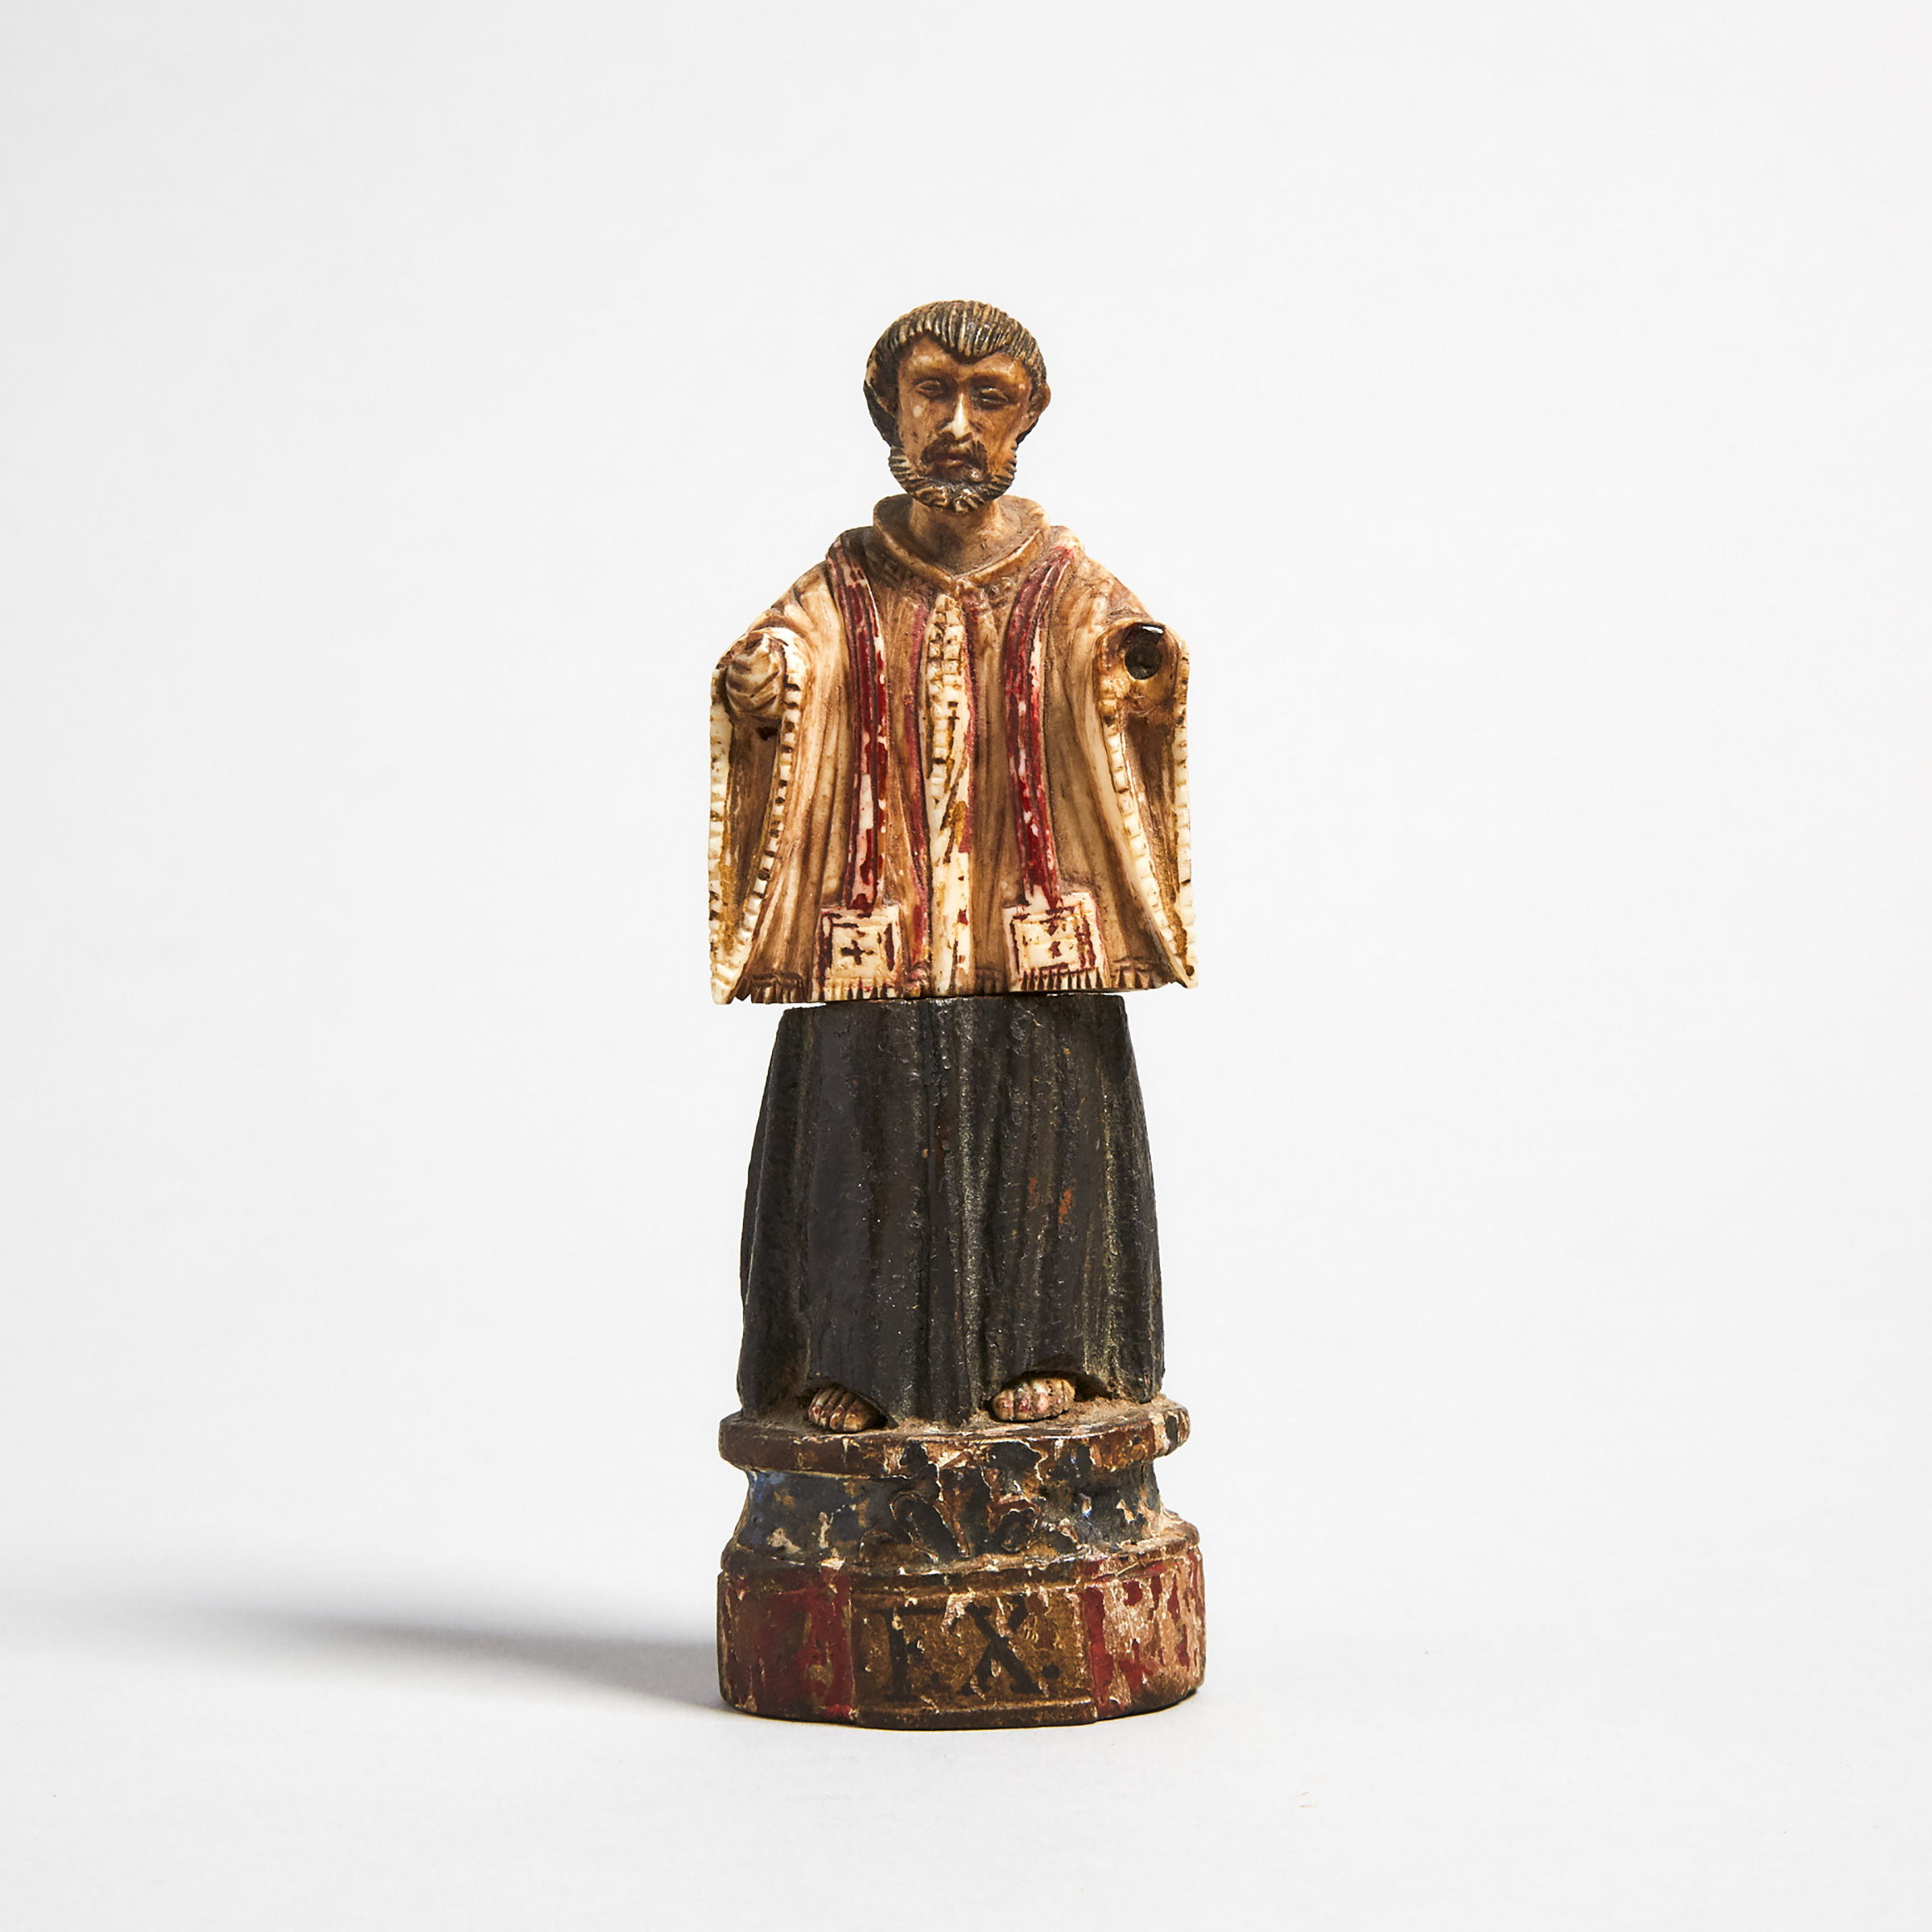 Indo-Portuguese Polychromed Bone and Wood Figure of St. Francis Xavier, Goa, 18th century